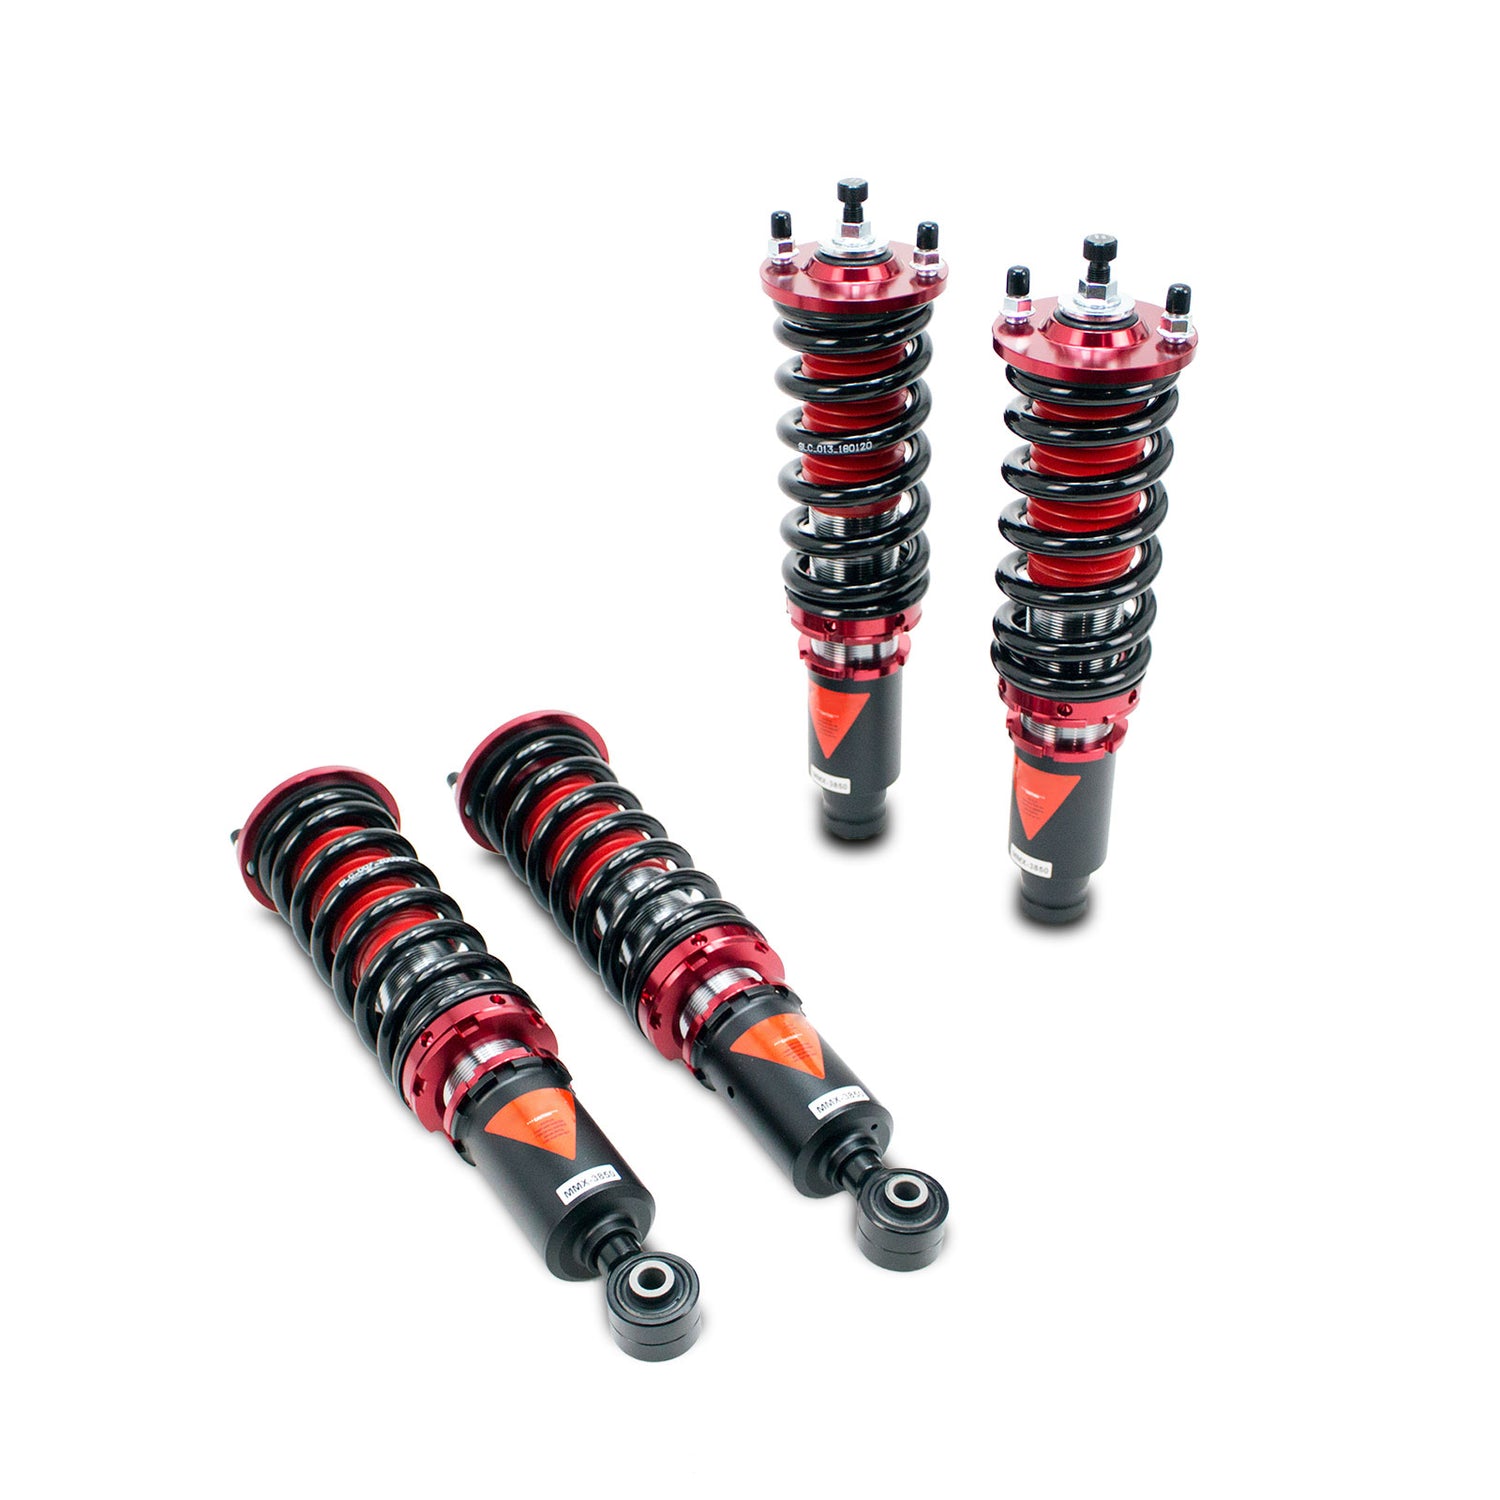 MMX3850 MAXX Coilovers Lowering Kit, Fully Adjustable, Ride Height, 40 Clicks Rebound Settings, Acura Integra Type-R(DC2R) 1996-01